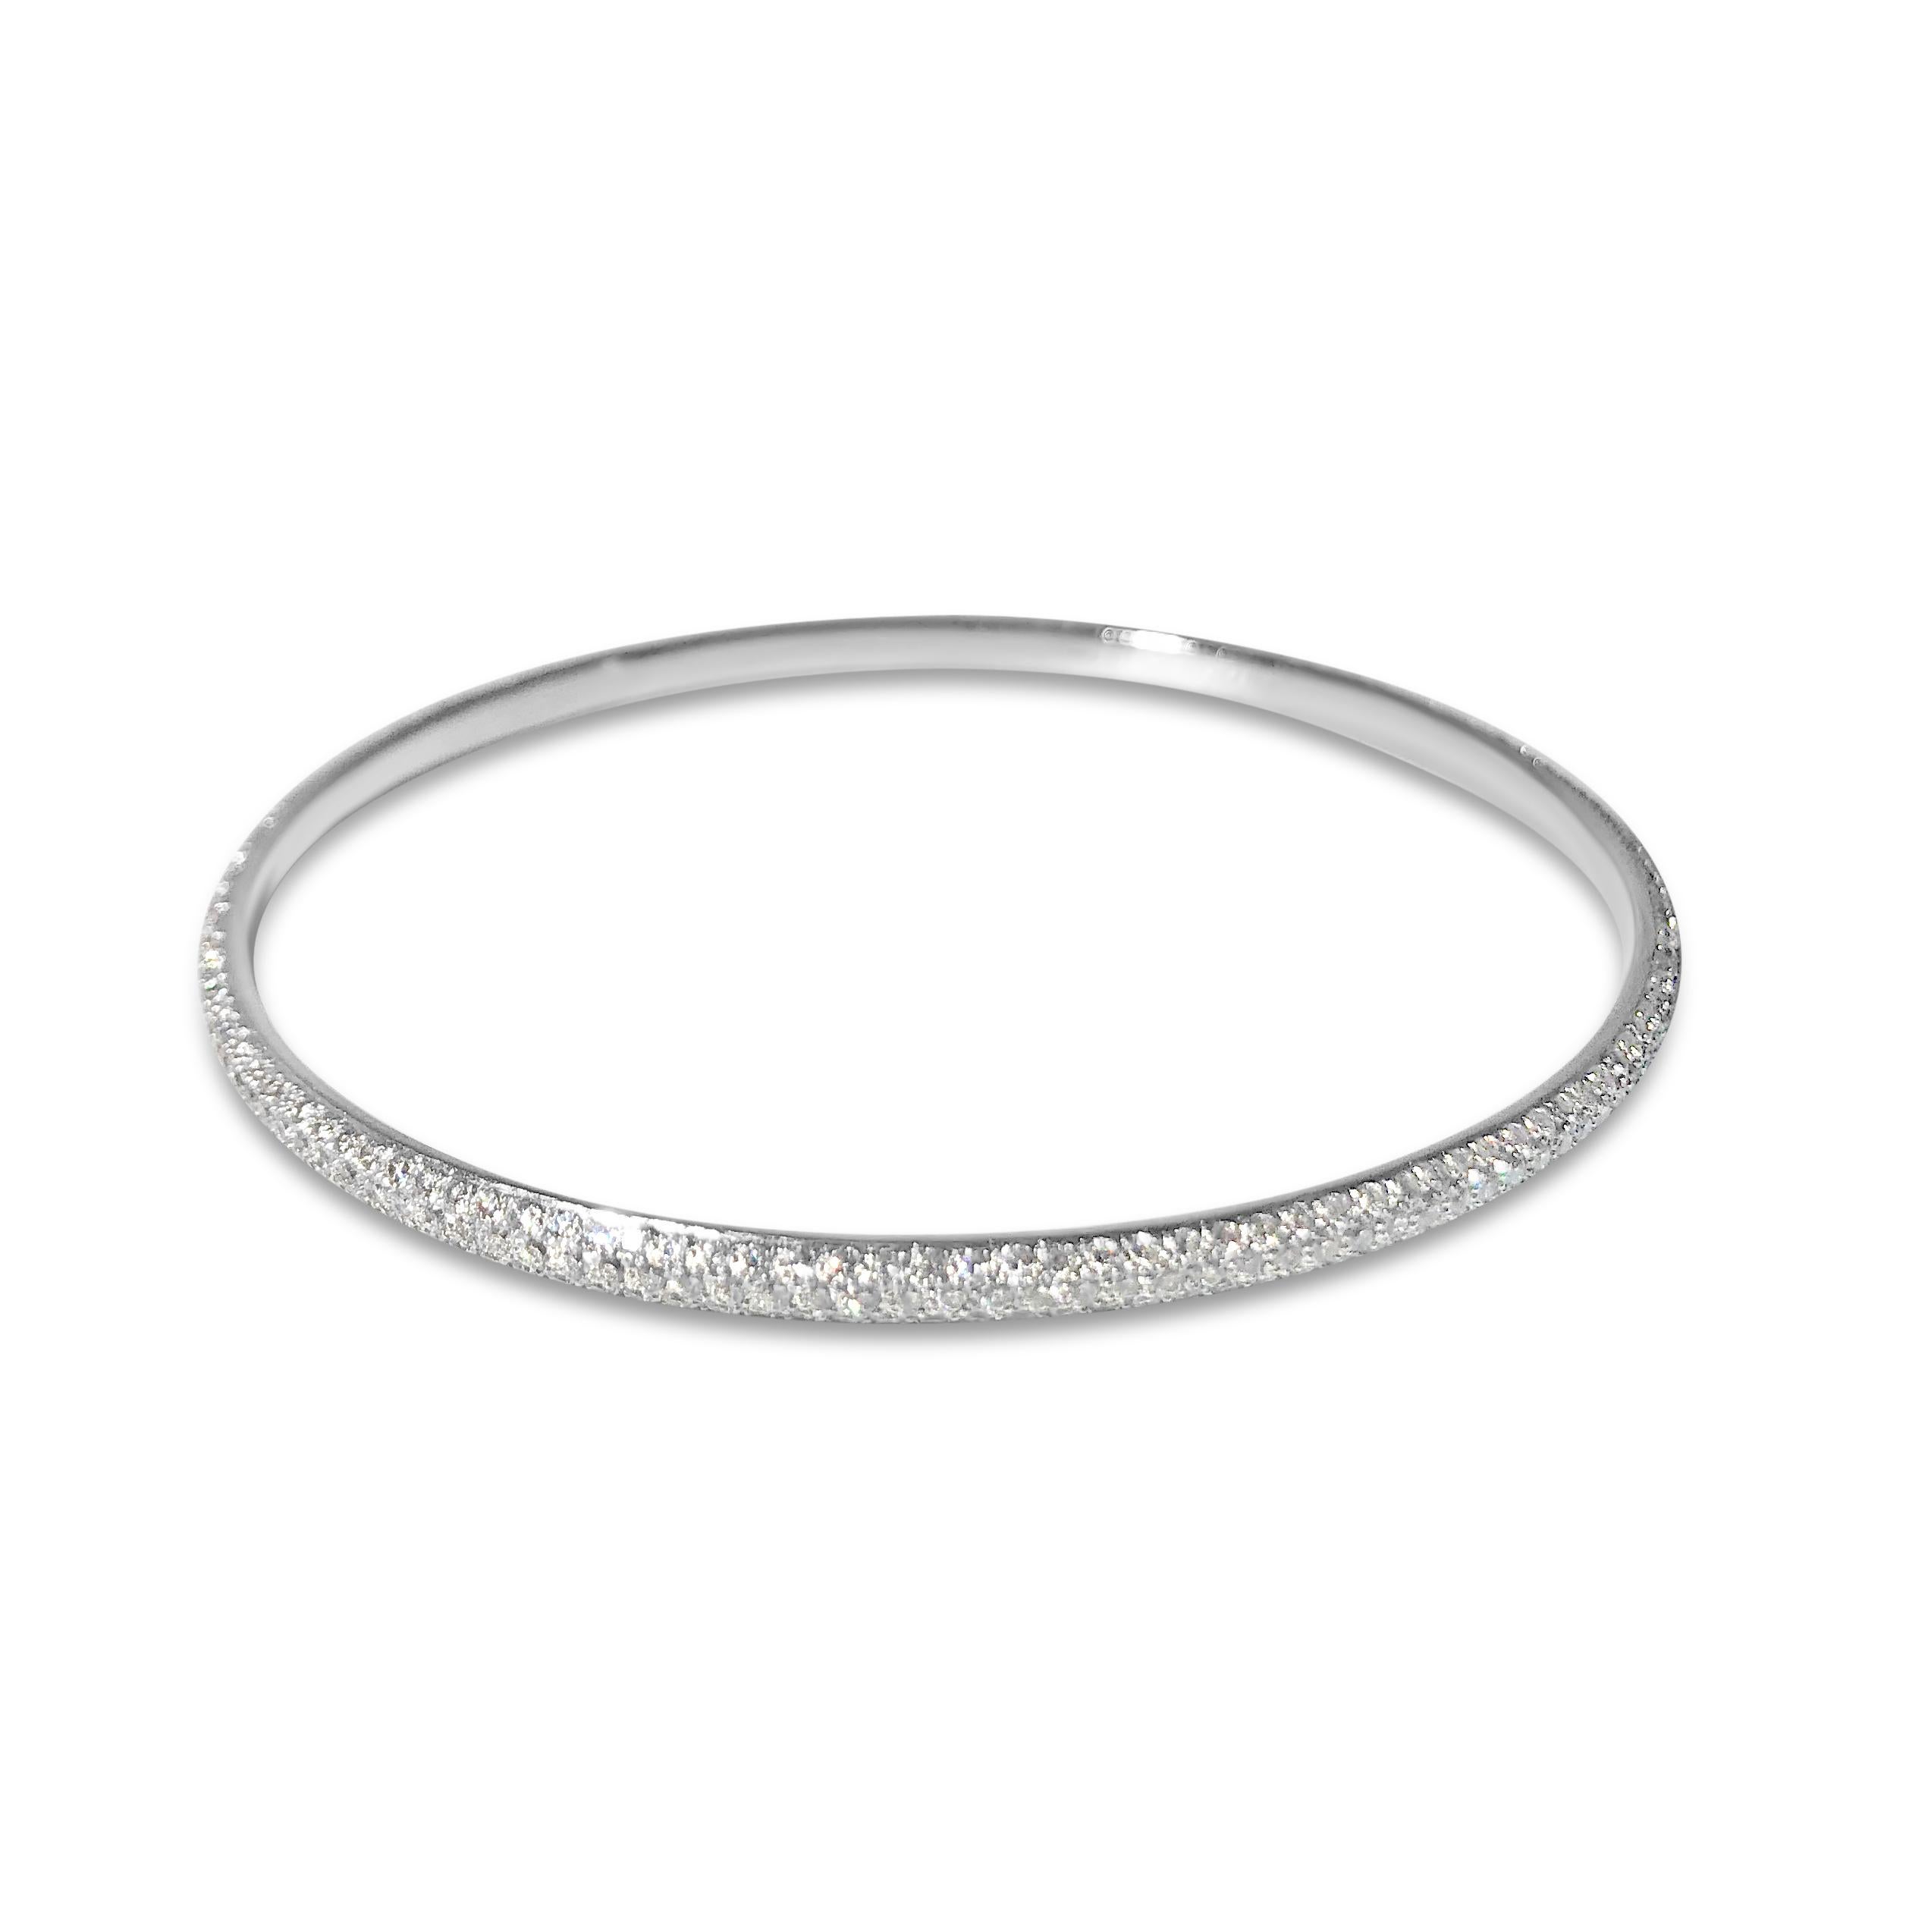 Our ultra-brilliant pavé diamond round bangle sparkles in 18K white gold, loaded with 405 round 1.3mm white diamonds totaling 3.10ct.  Meant to slip onto your wrist and shine.

Specifications:
- Stone(s): White Diamond
- Diamond-Cut & Clarity: 